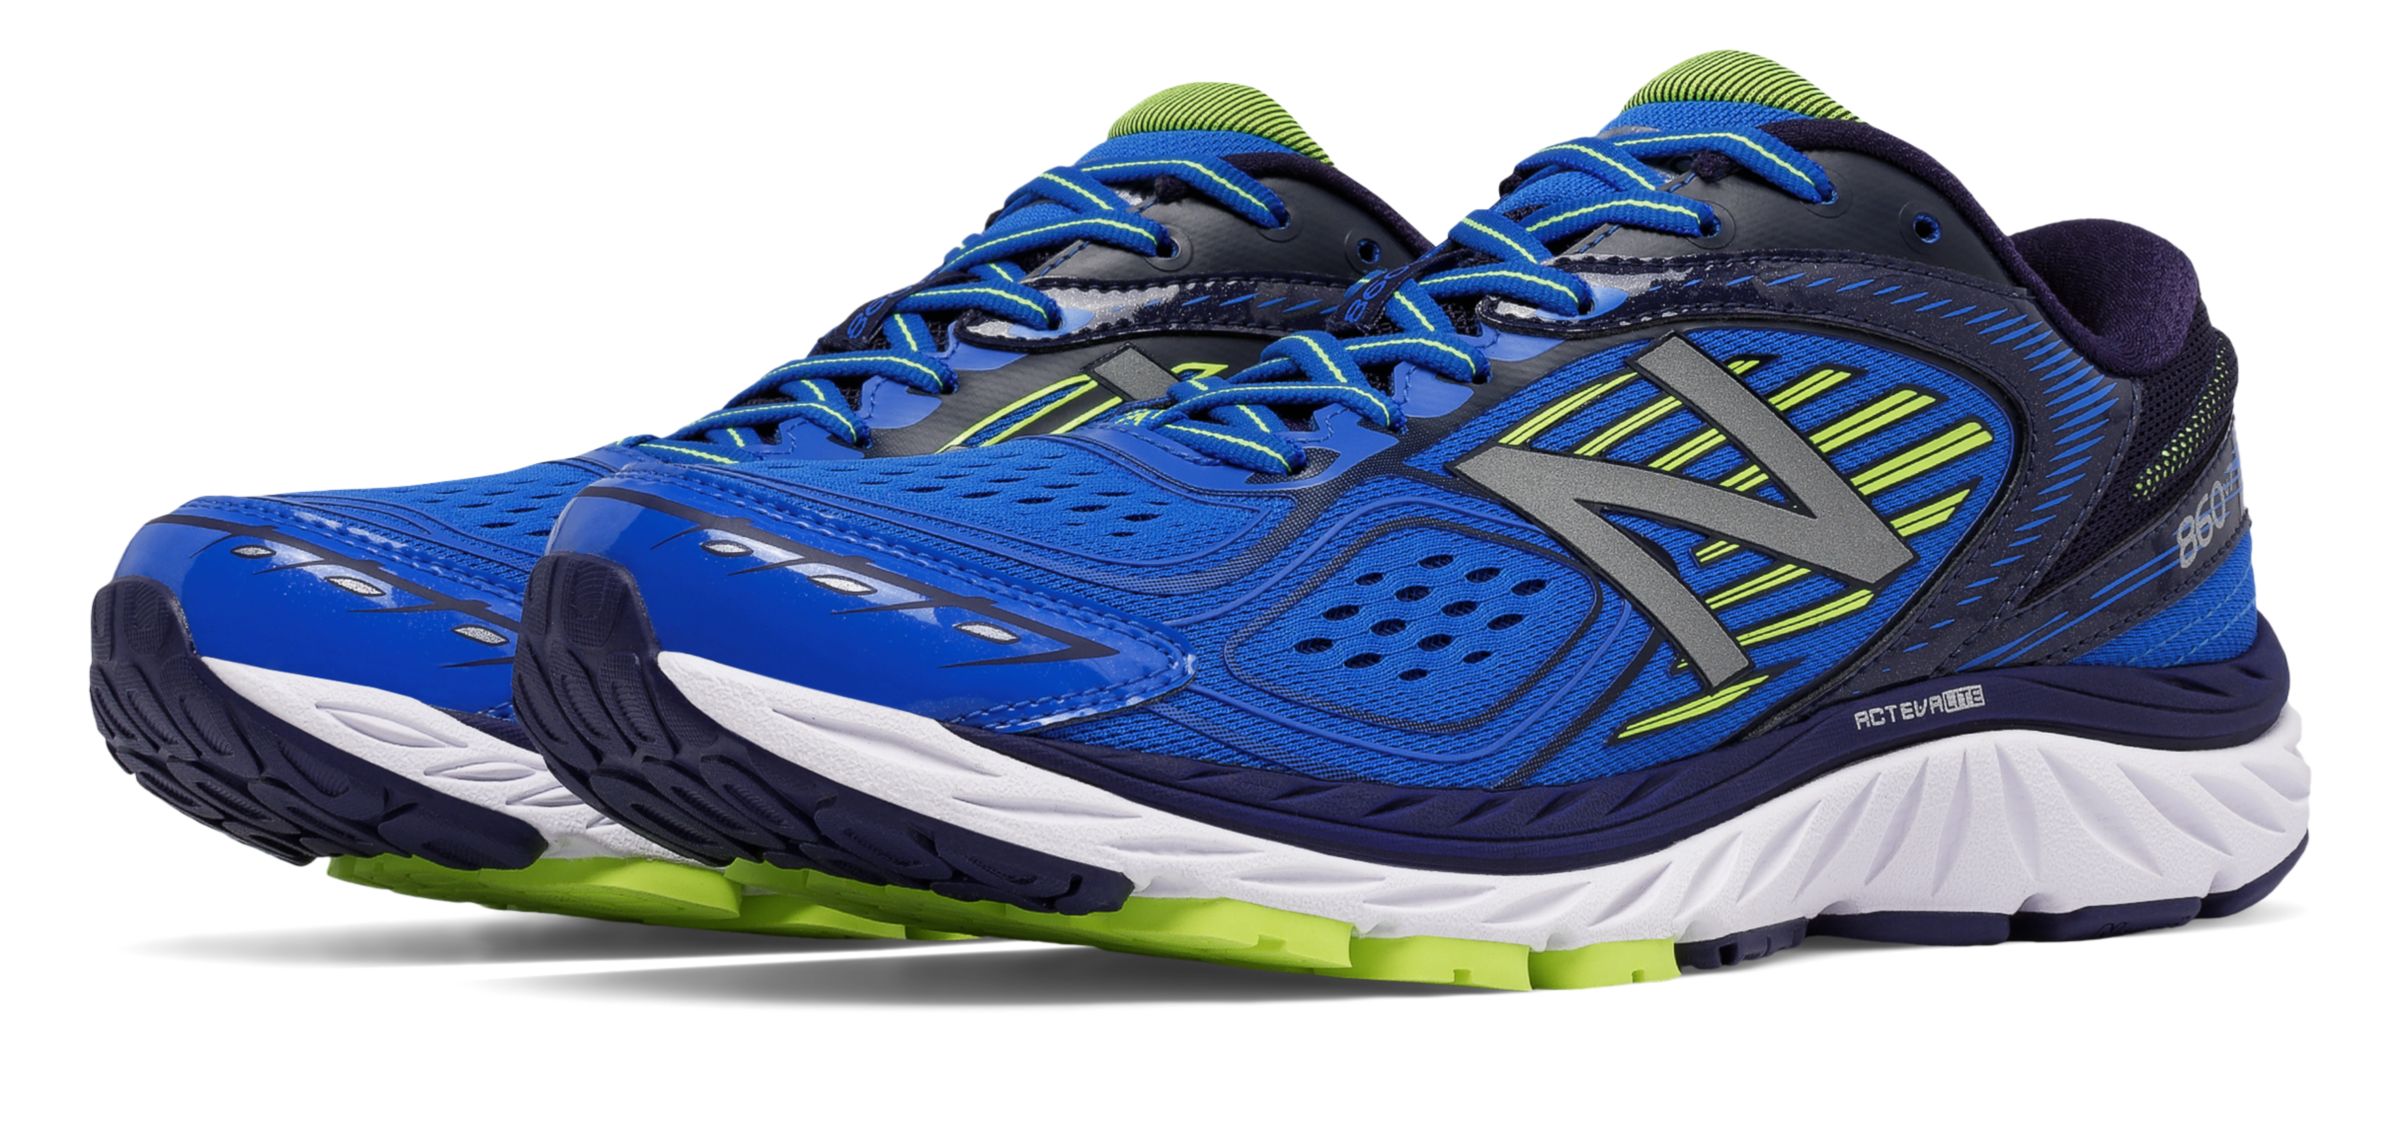 New Balance M860-V7 on Sale - Discounts Up to 40% Off on M860BY7 at Joe's New  Balance Outlet